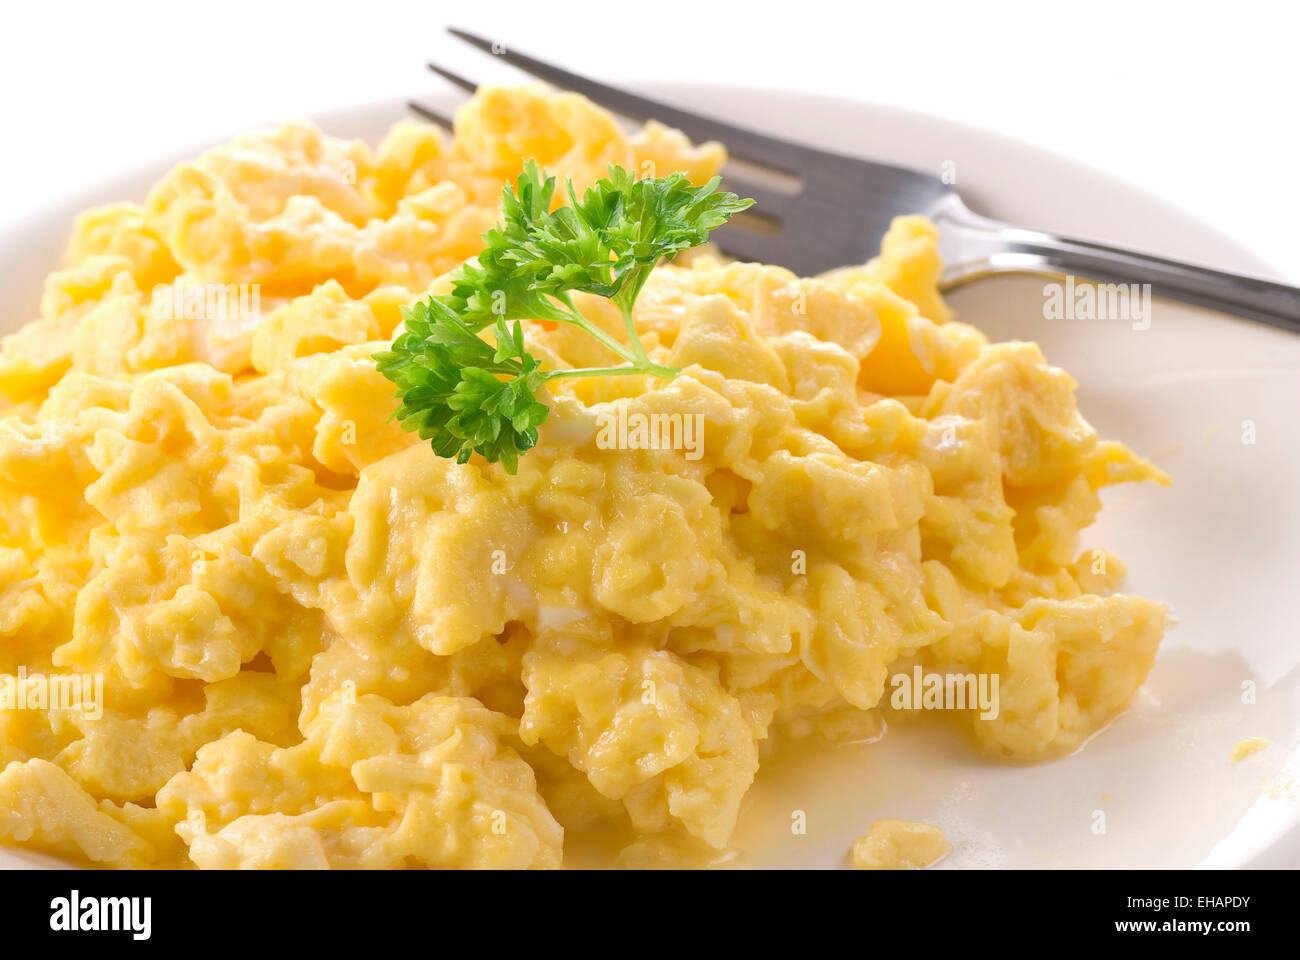 Scrambled eggs on a plate. Stock Photo